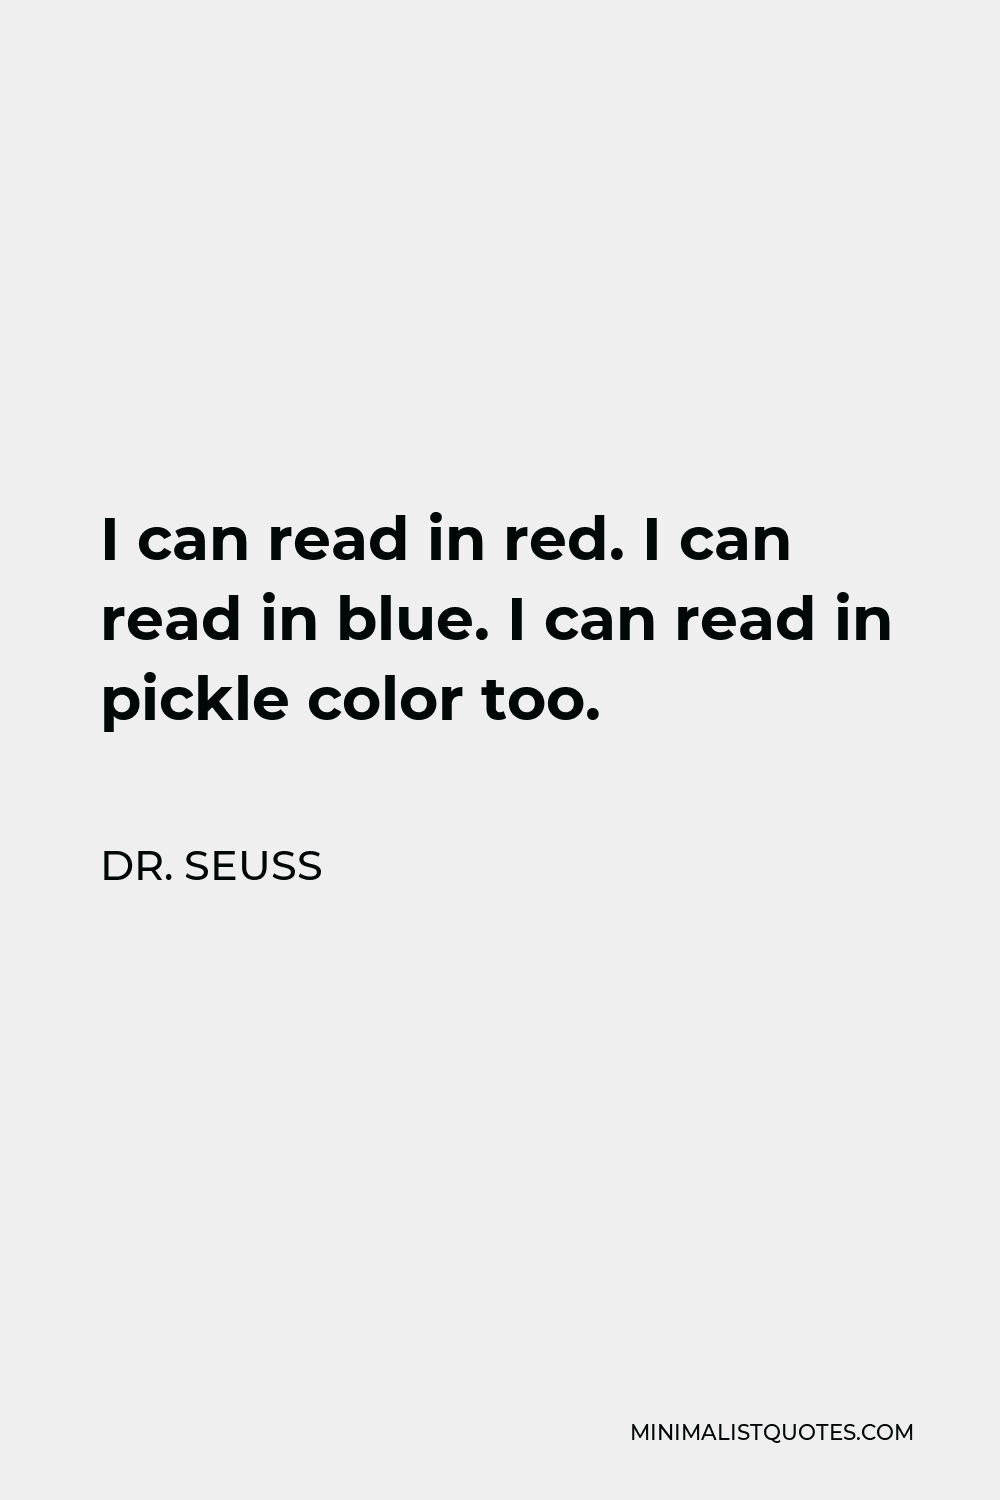 Dr. Seuss Quote - I can read in red. I can read in blue. I can read in pickle color too.